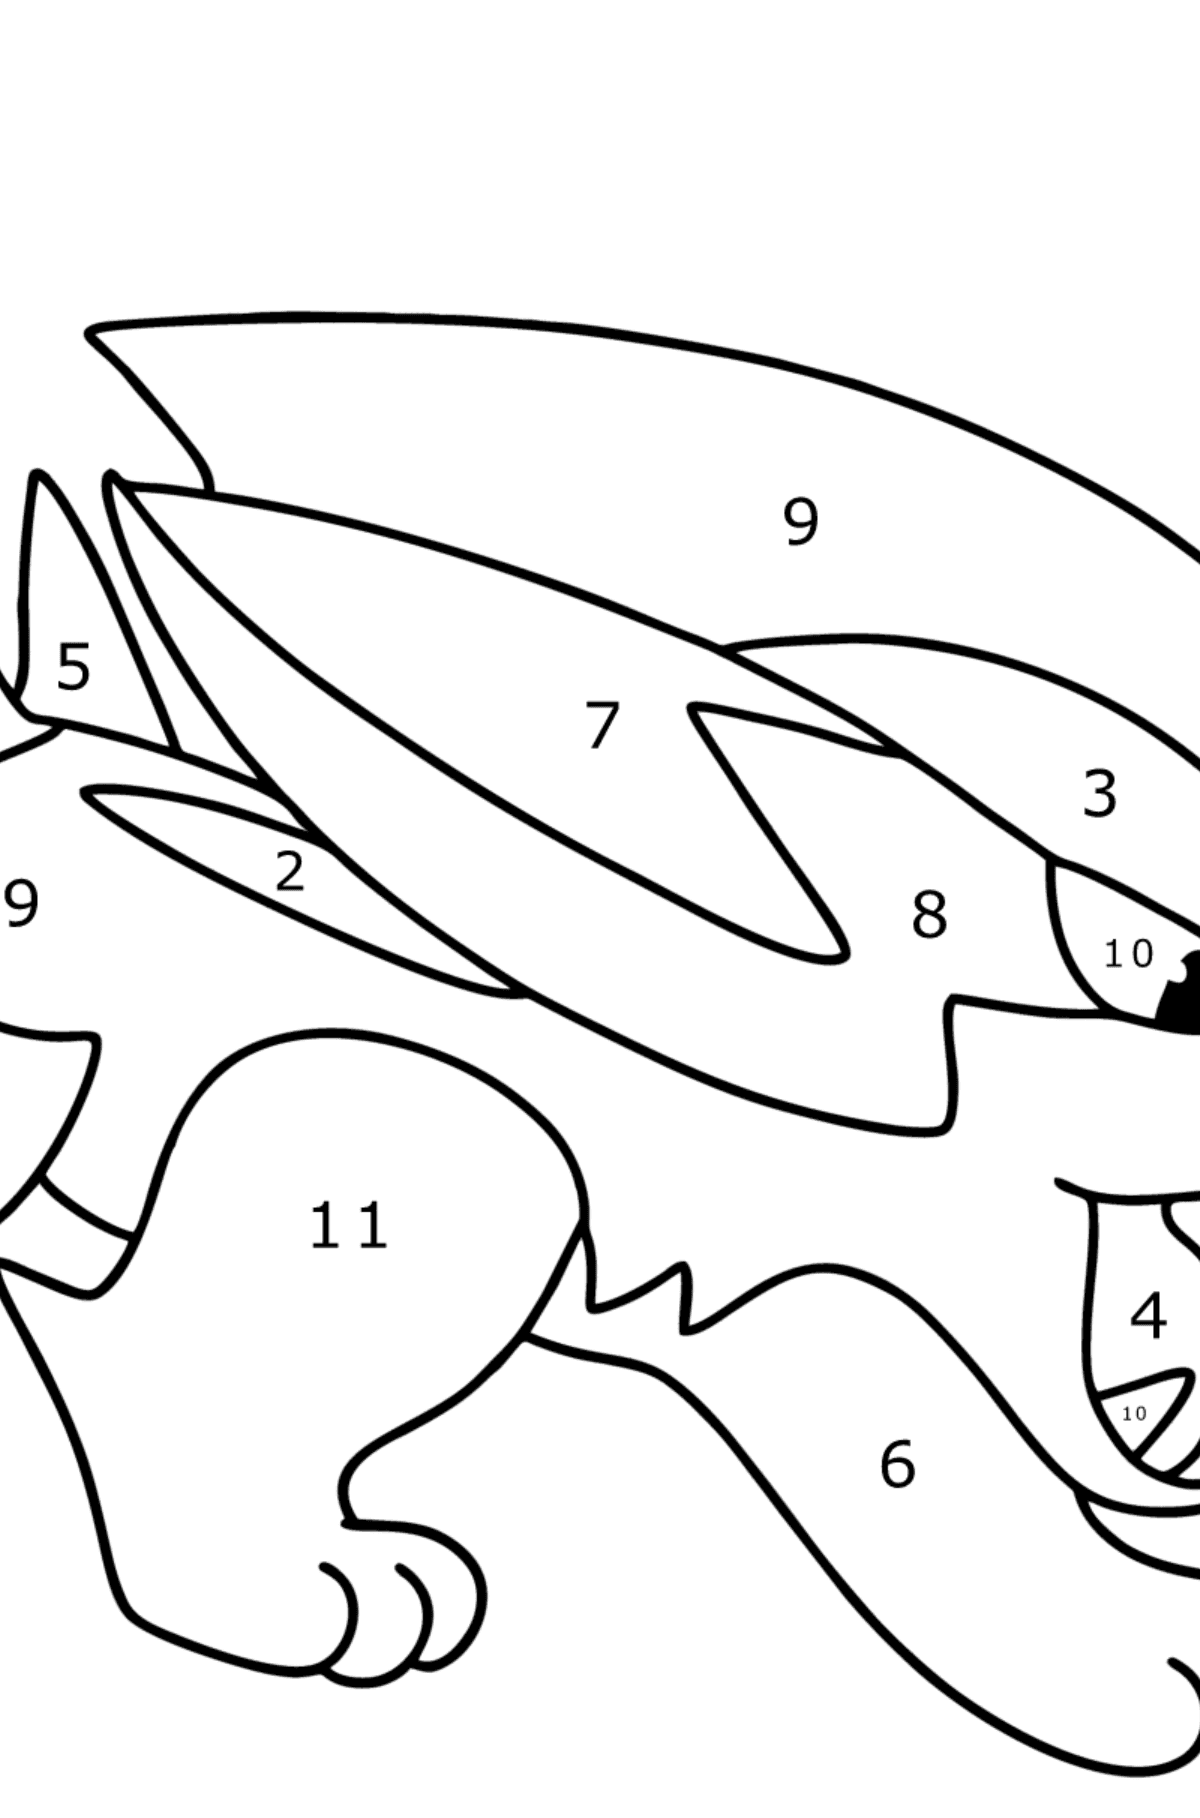 Colouring page Pokémon X and Y Electrike - Coloring by Numbers for Kids